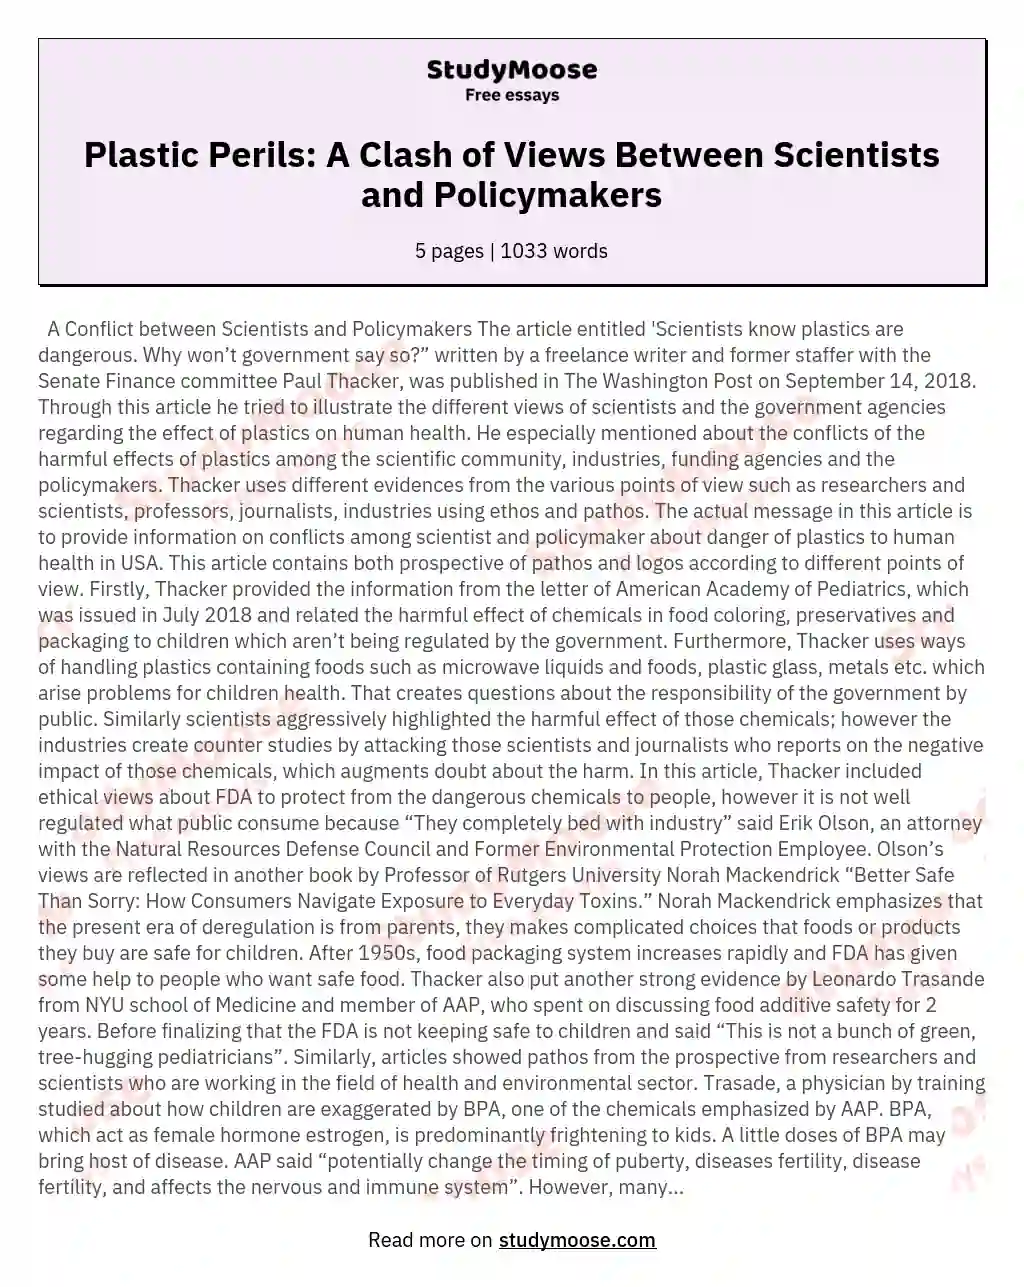 Plastic Perils: A Clash of Views Between Scientists and Policymakers essay